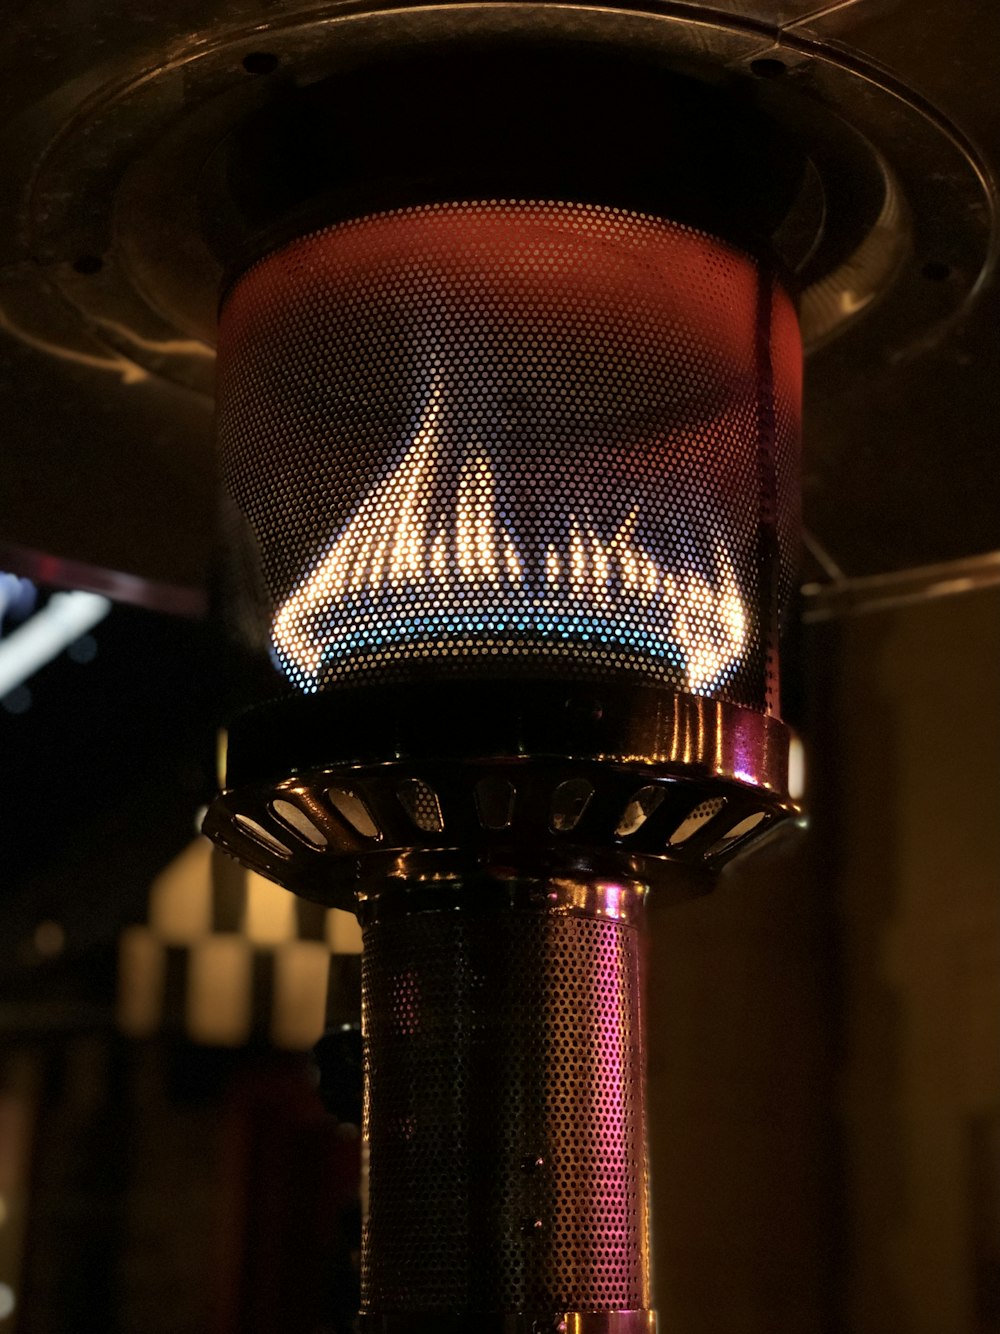 a close up of a metal object with a flame